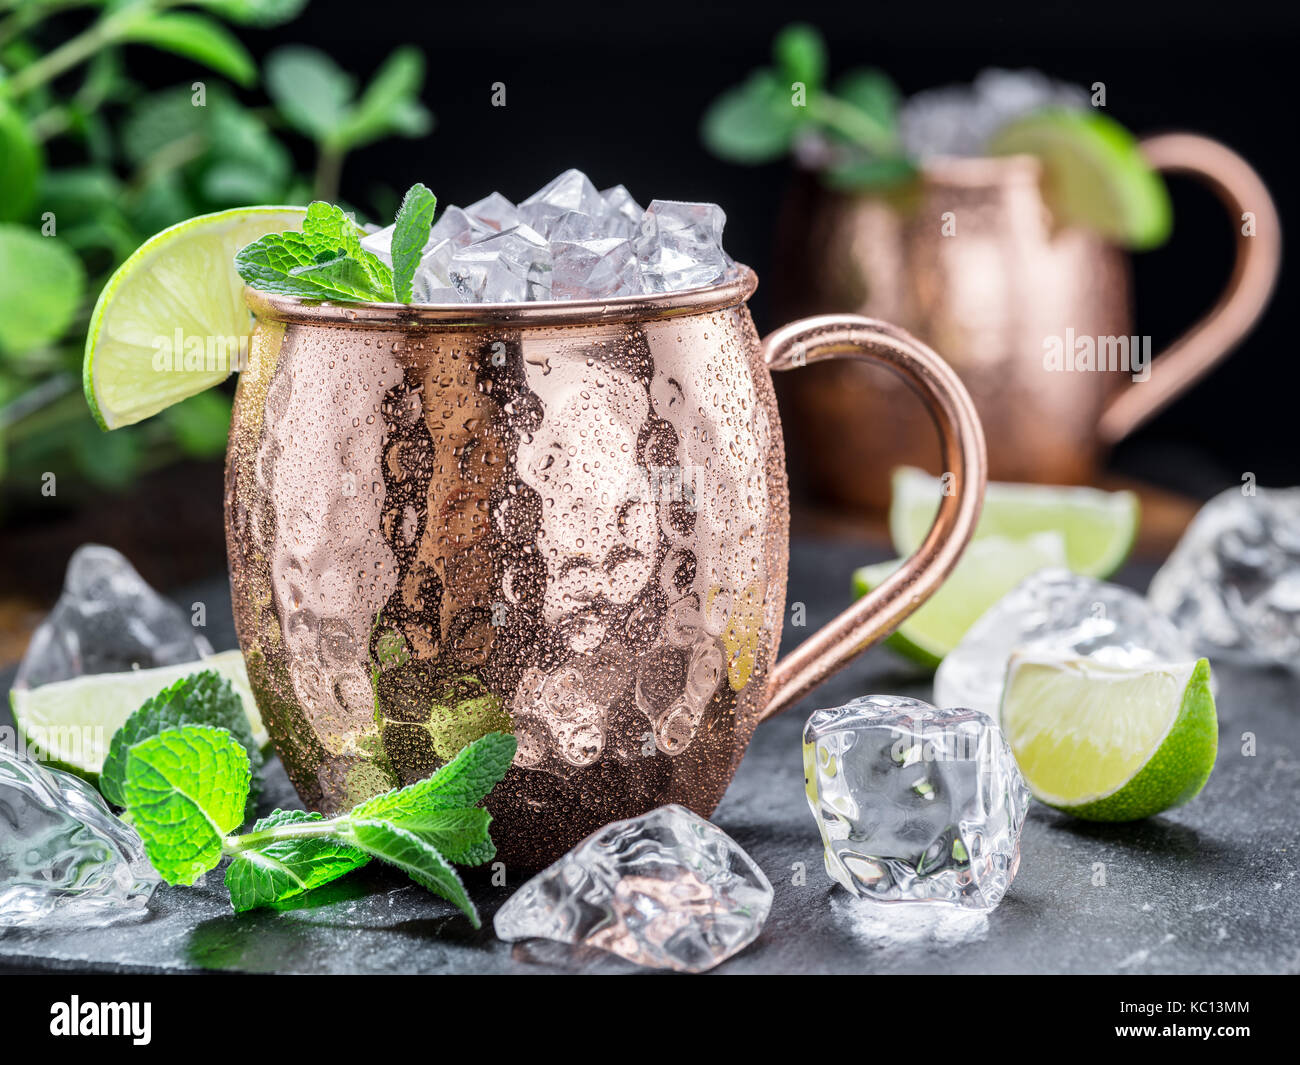 De Kulture Handcrafted Pure Copper Mug Moscow Mule Large Pitcher